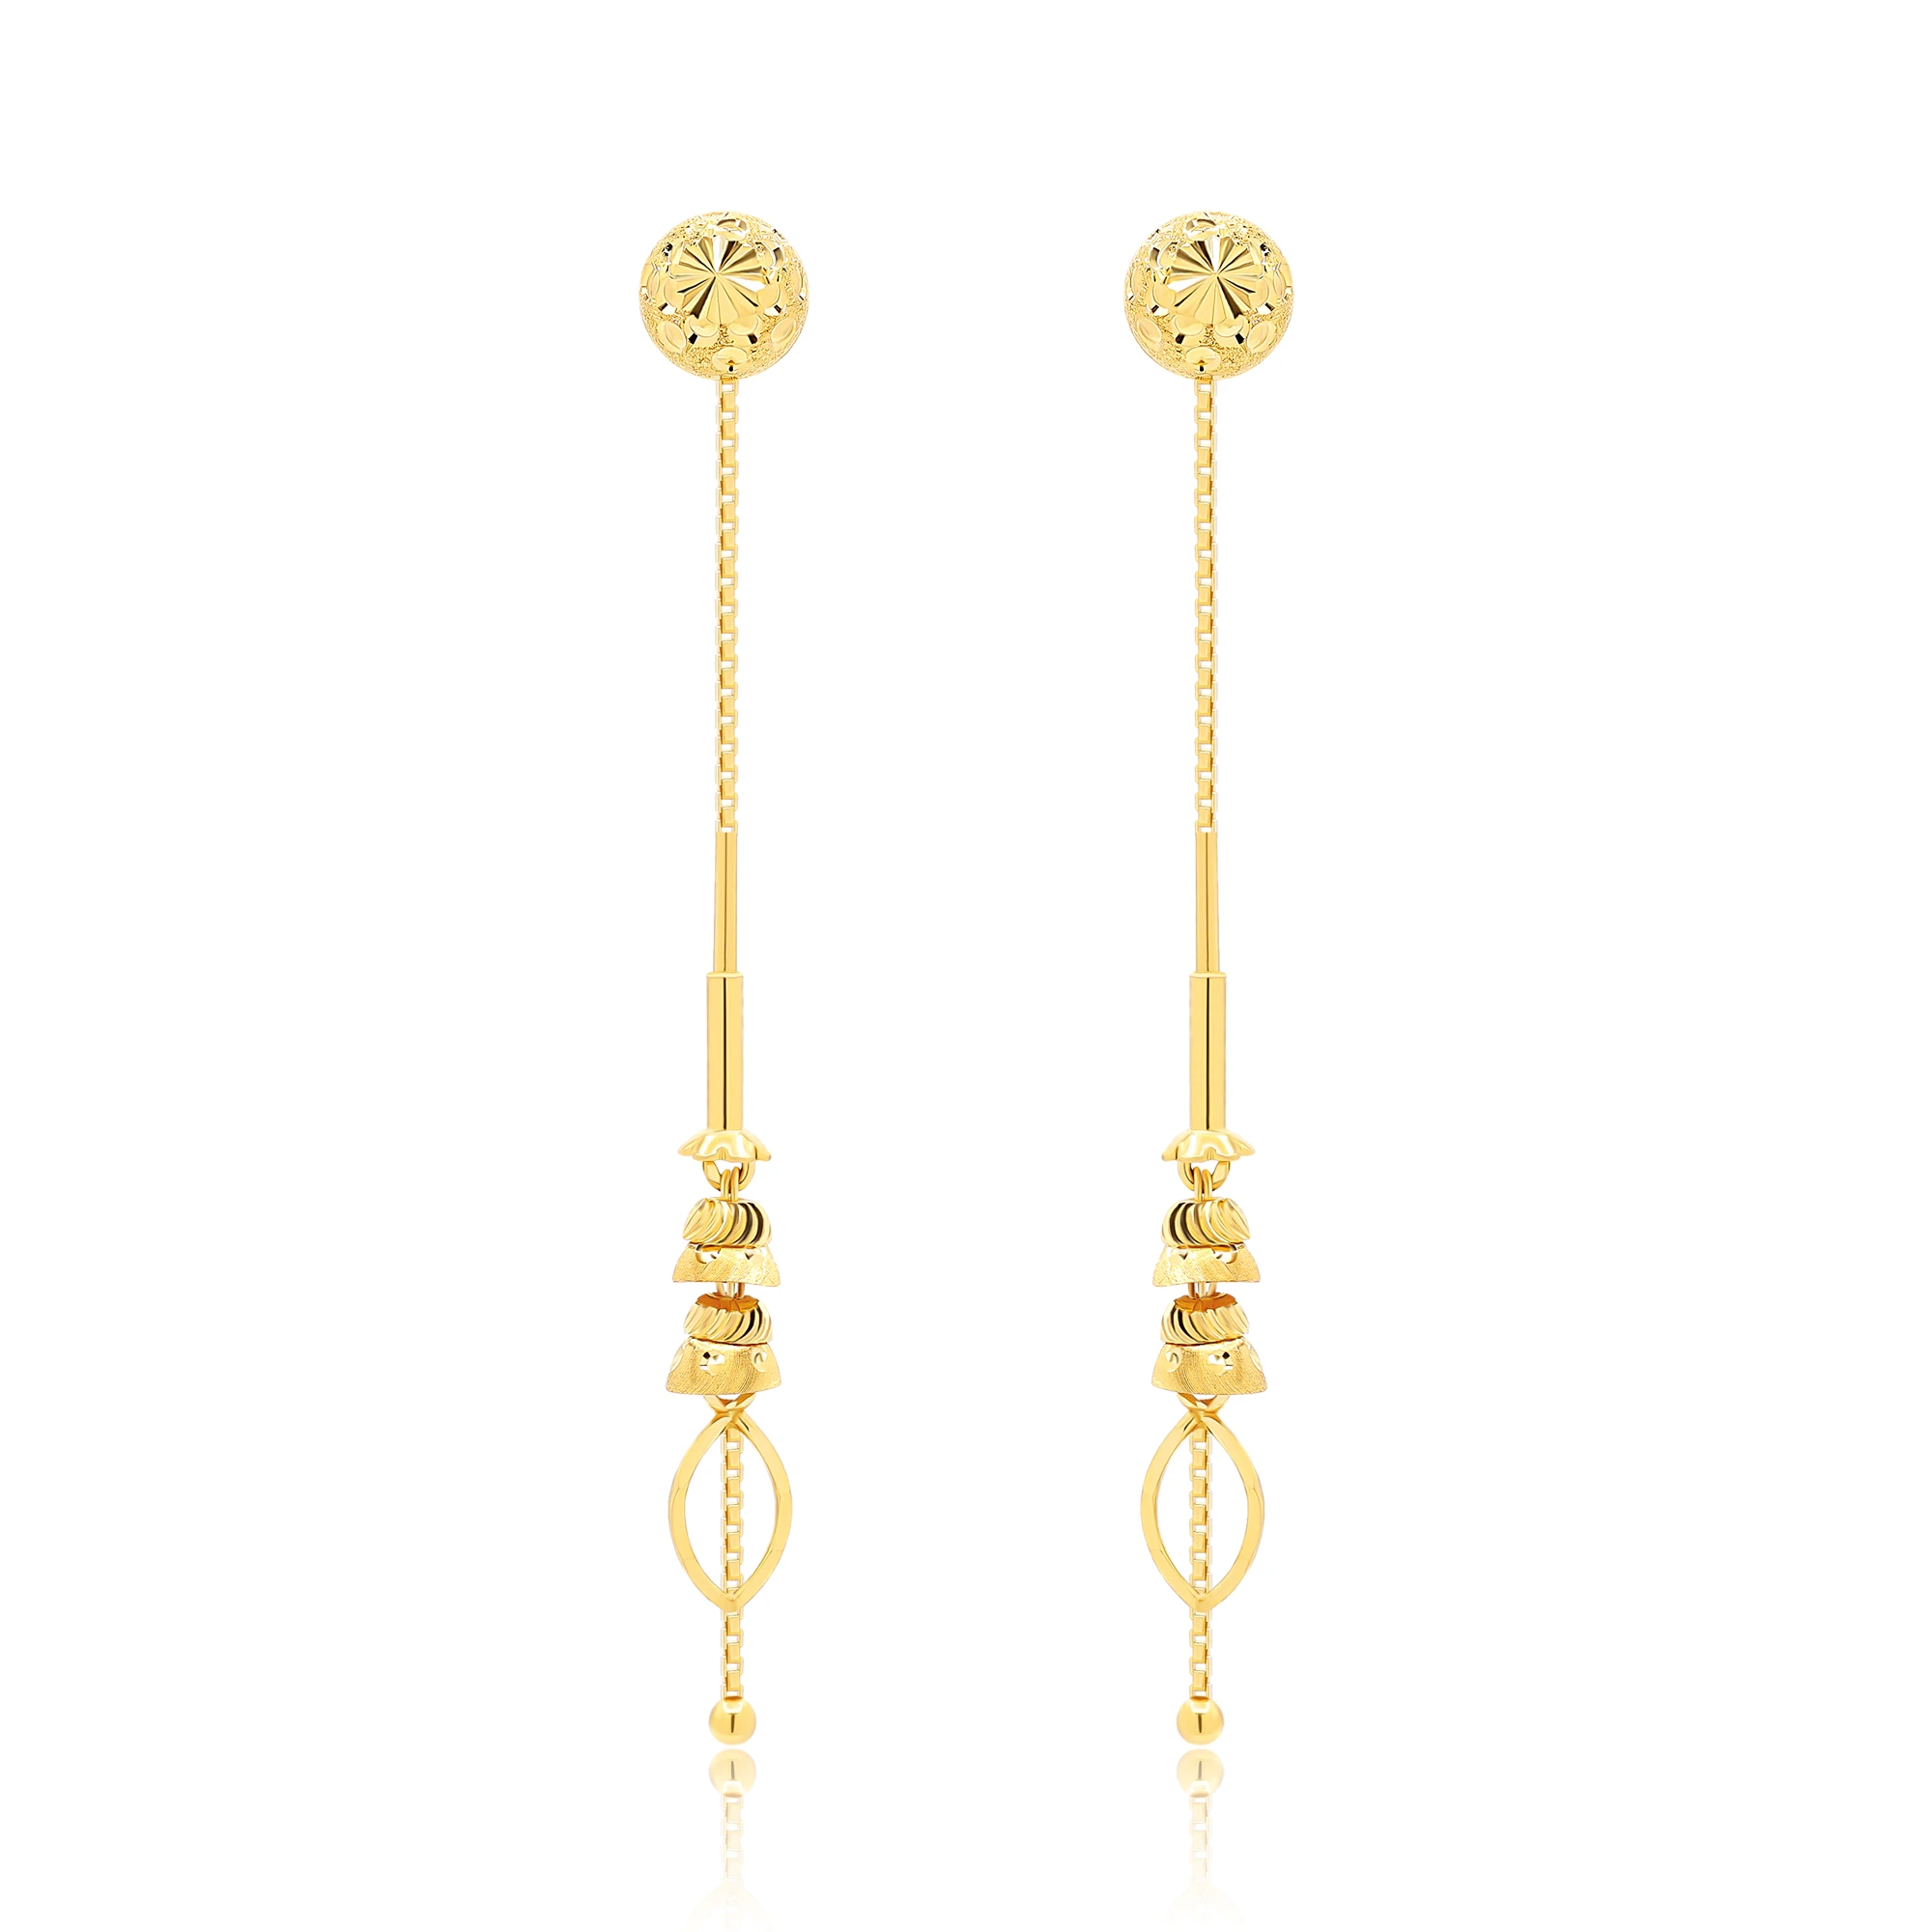 Manufacturer of 22k / 916 gold 2 line vertical sui dhaga earrings | Jewelxy  - 43079